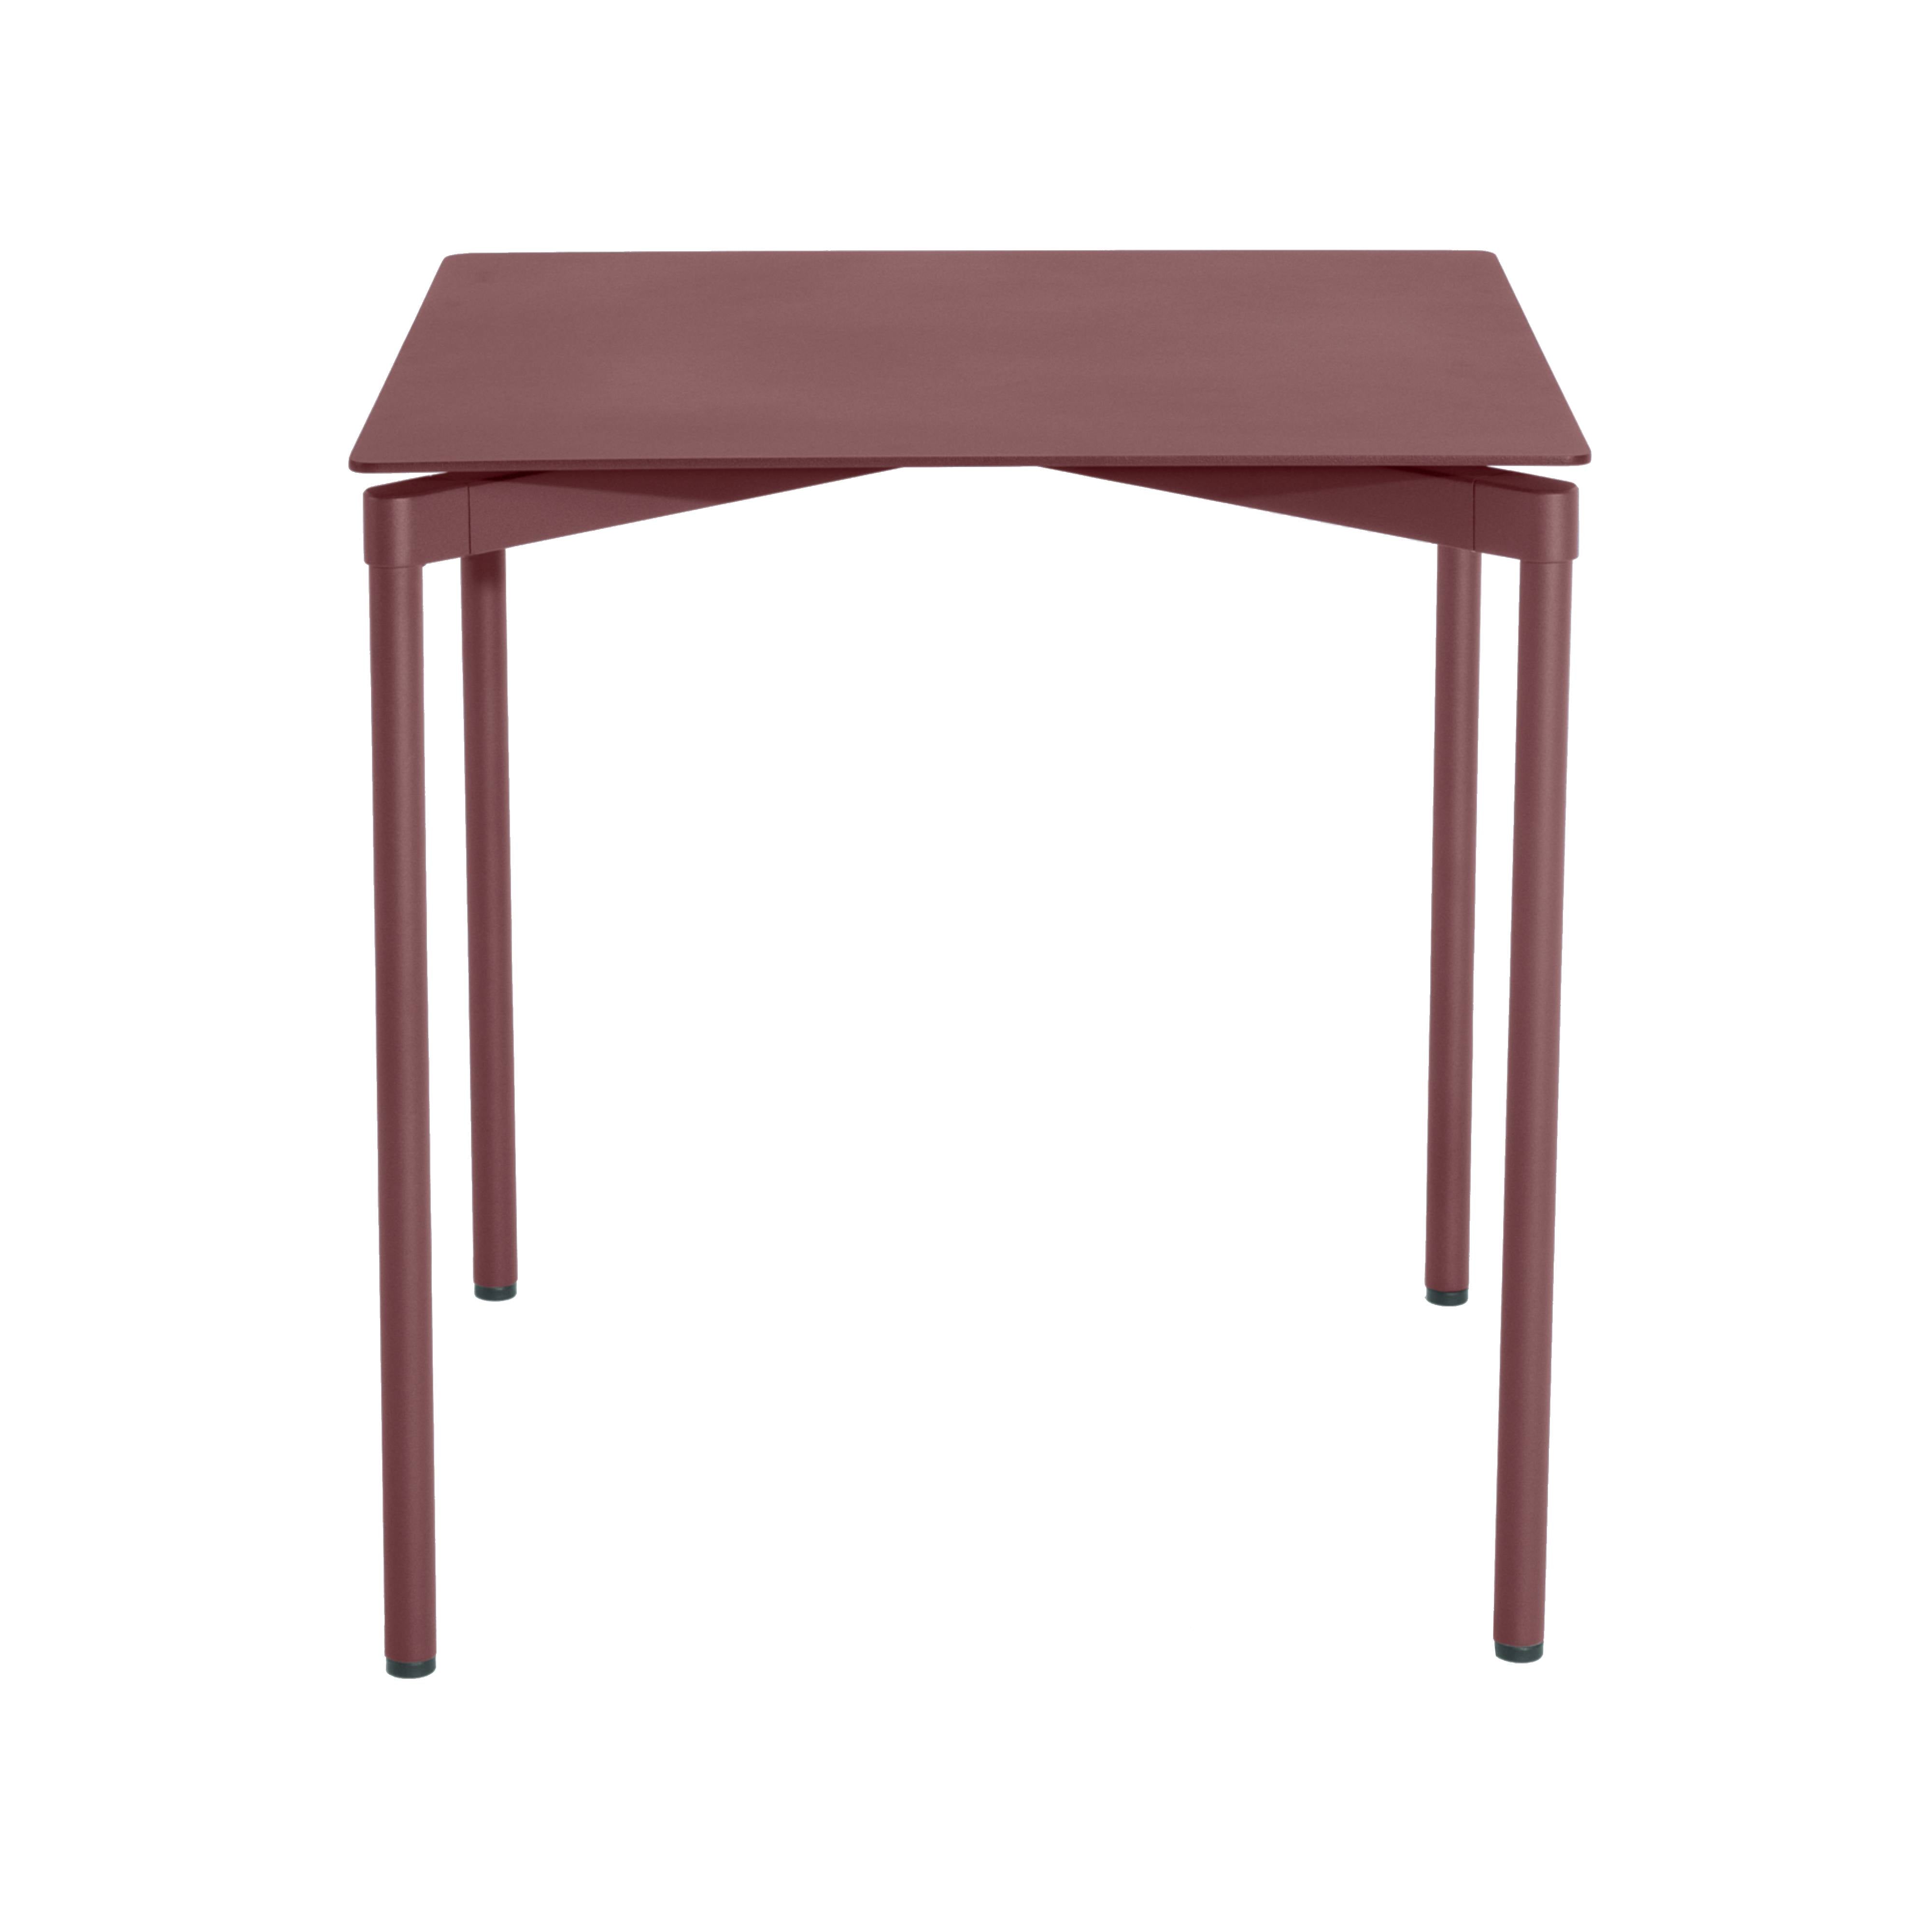 Fromme Table: Square + Brown Red